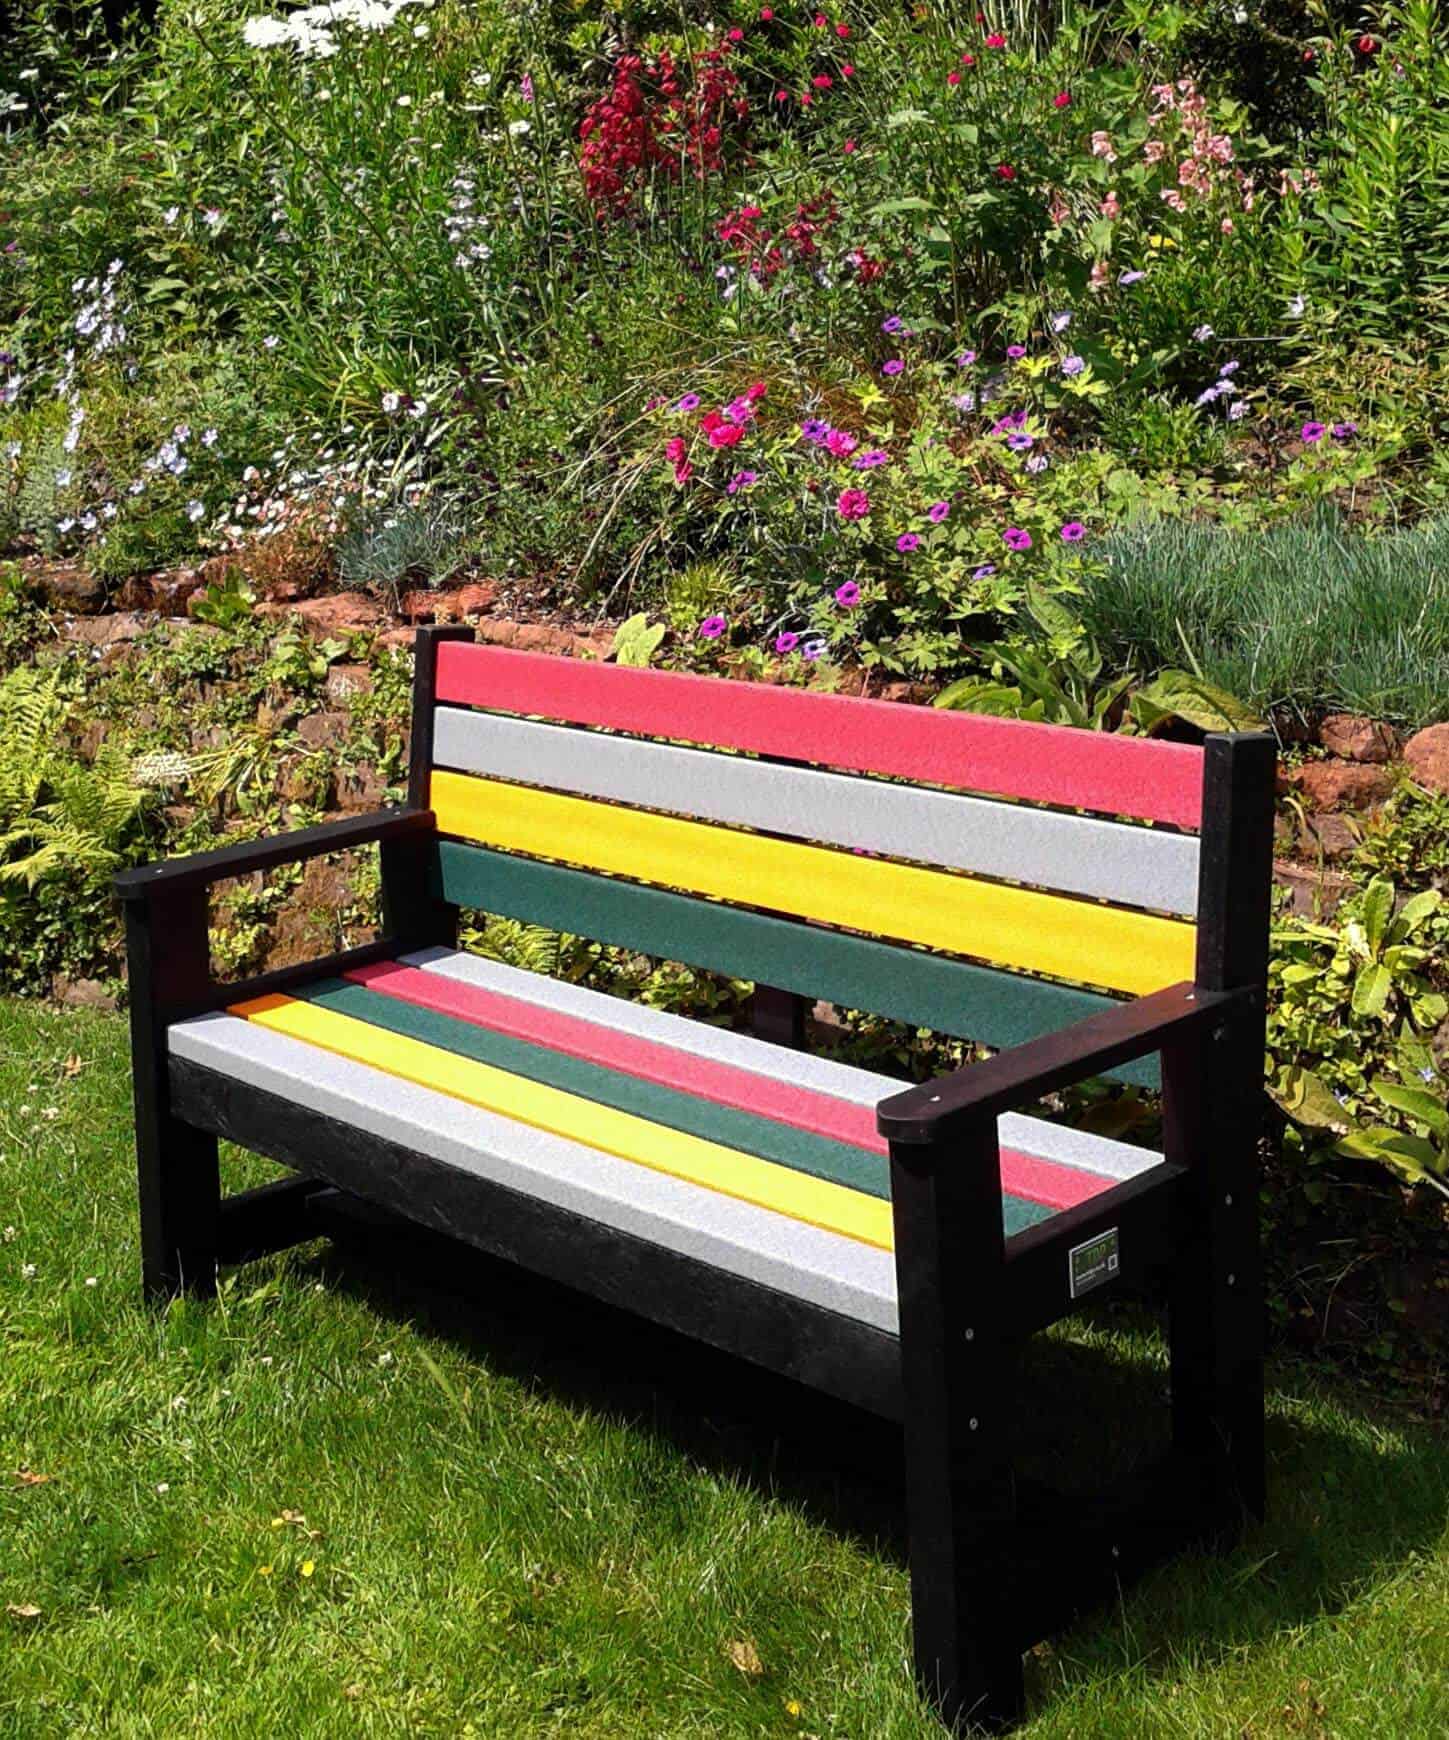 Customise your own garden furniture with TDP